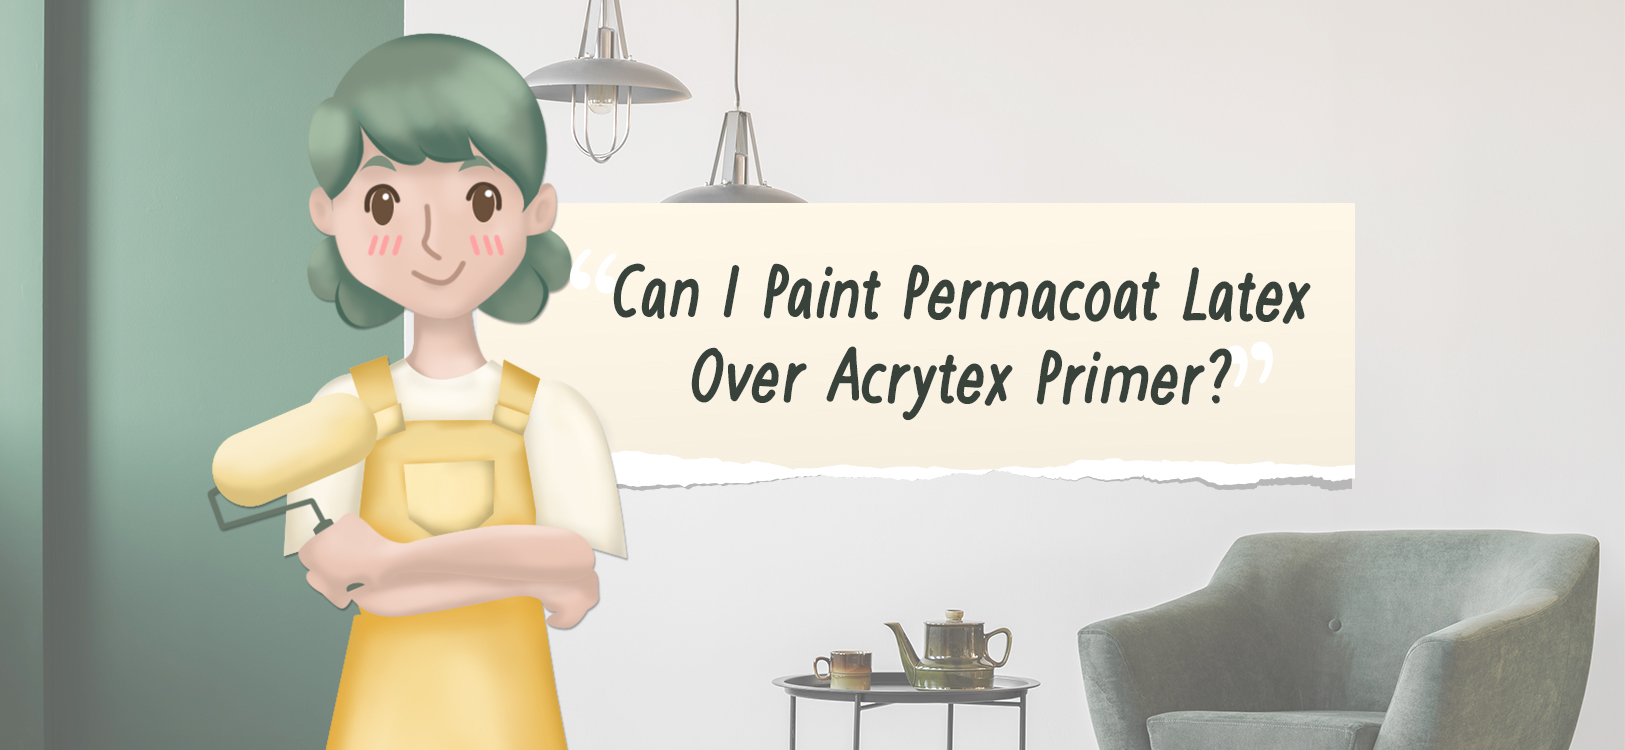 Paint TechTalk with Lettie: Can I Paint Permacoat Latex Over Acrytex Primer?